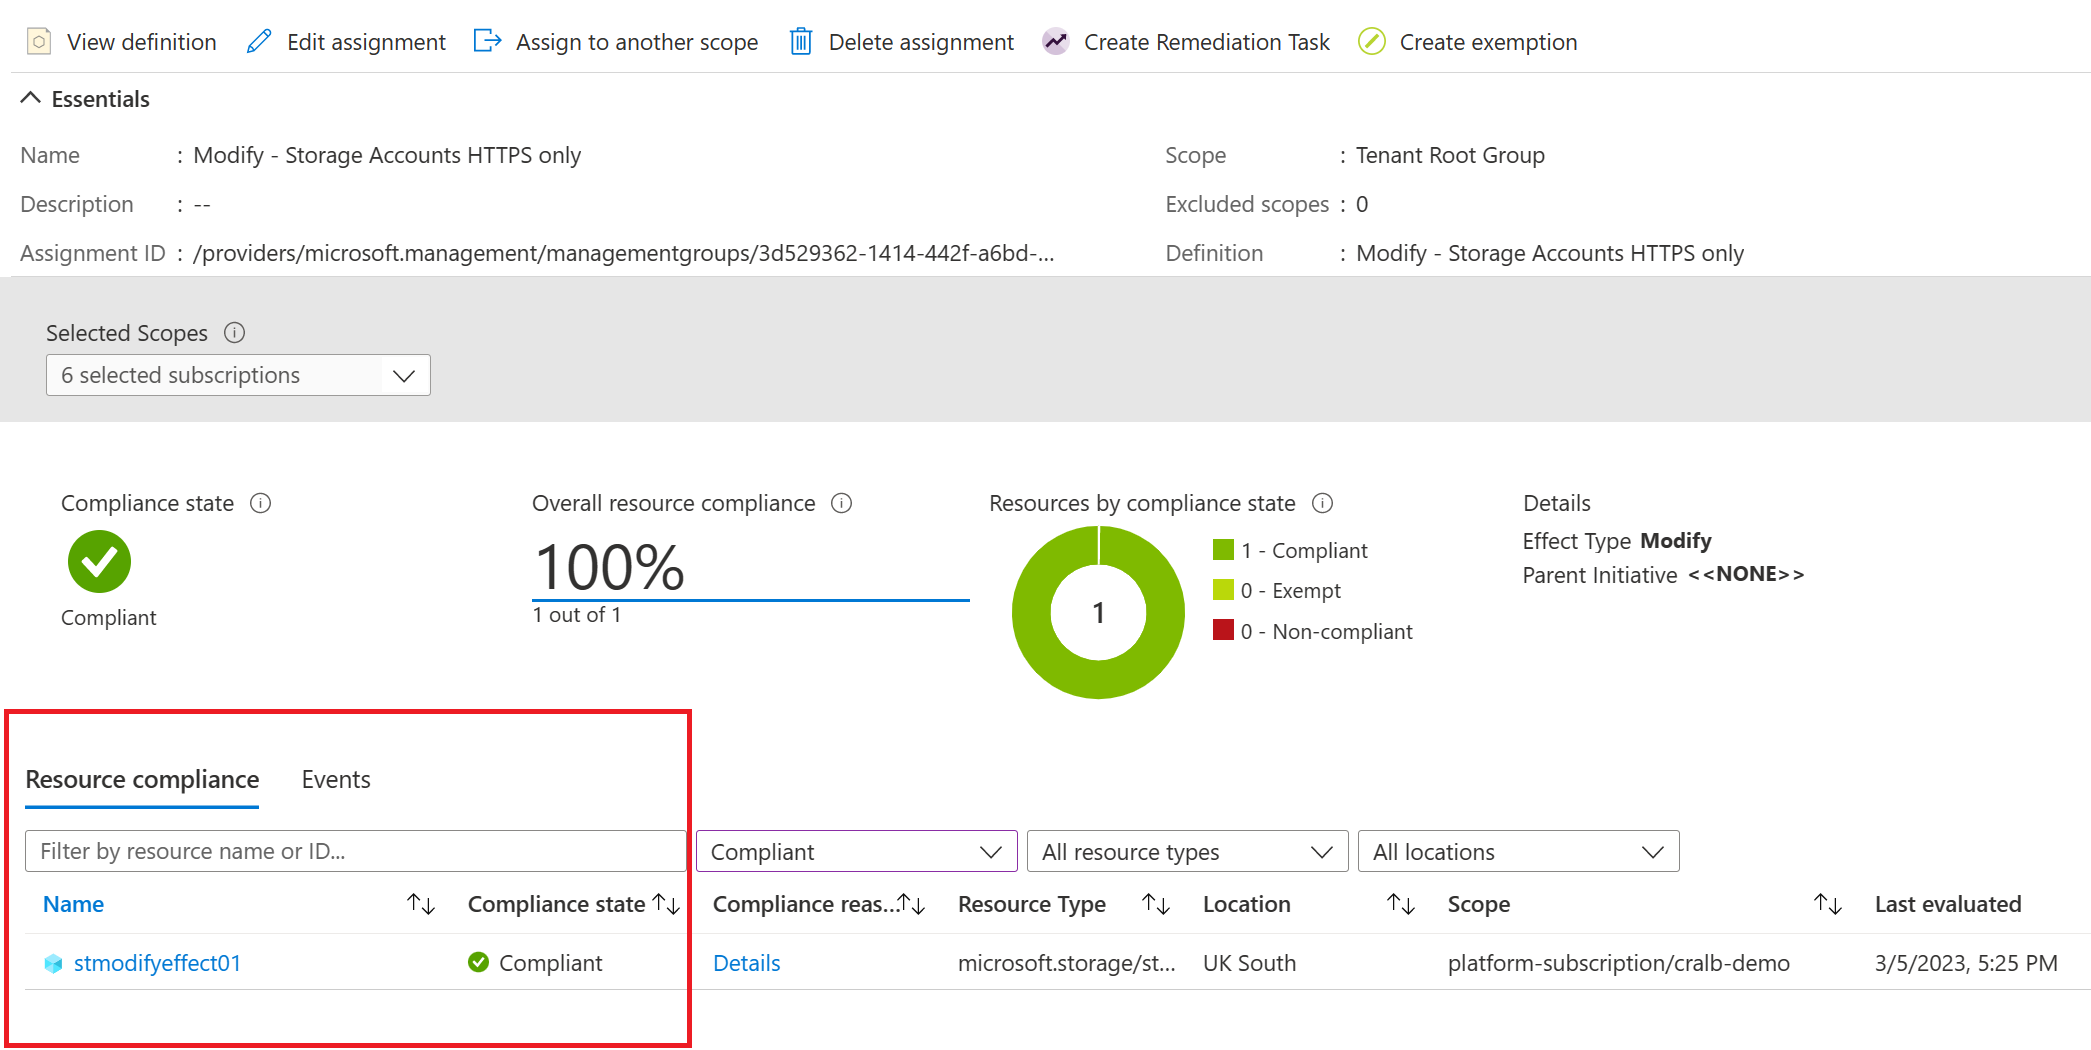 Testing out Azure Policies Modify Effect